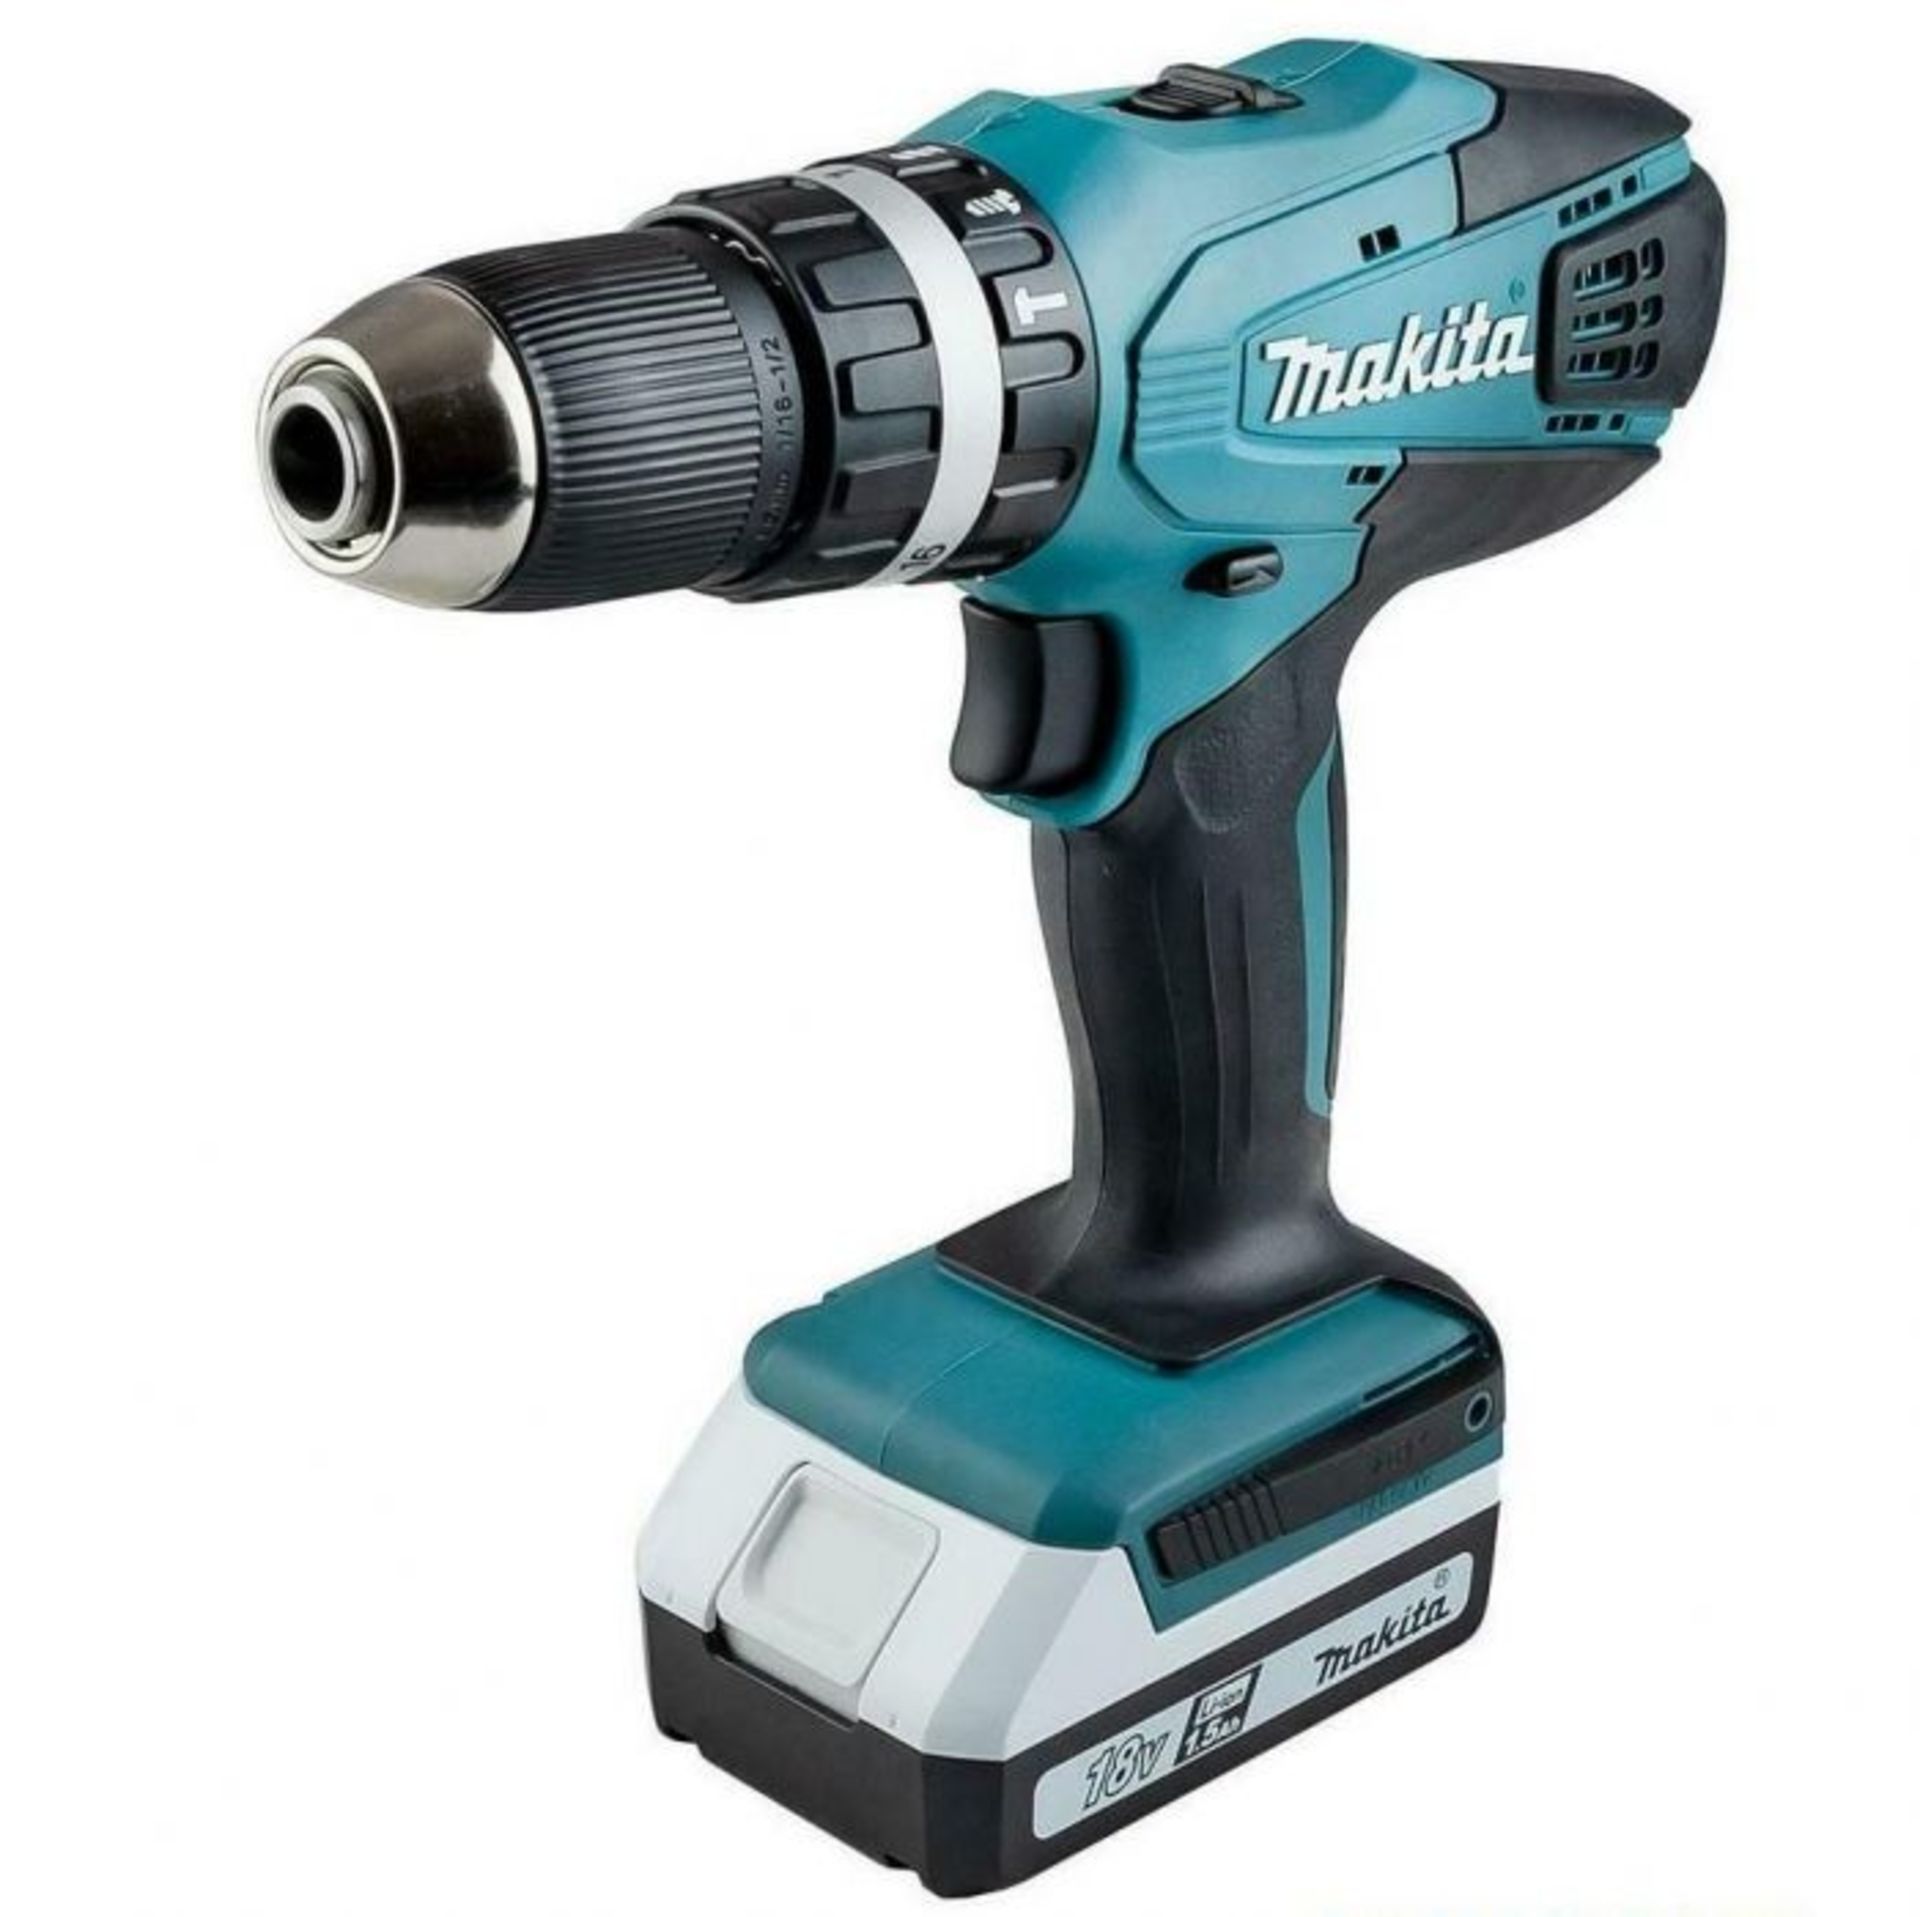 V Brand New Makita 18v Cordless Hammer Drill With Battery And Charger And Case - Image 2 of 3